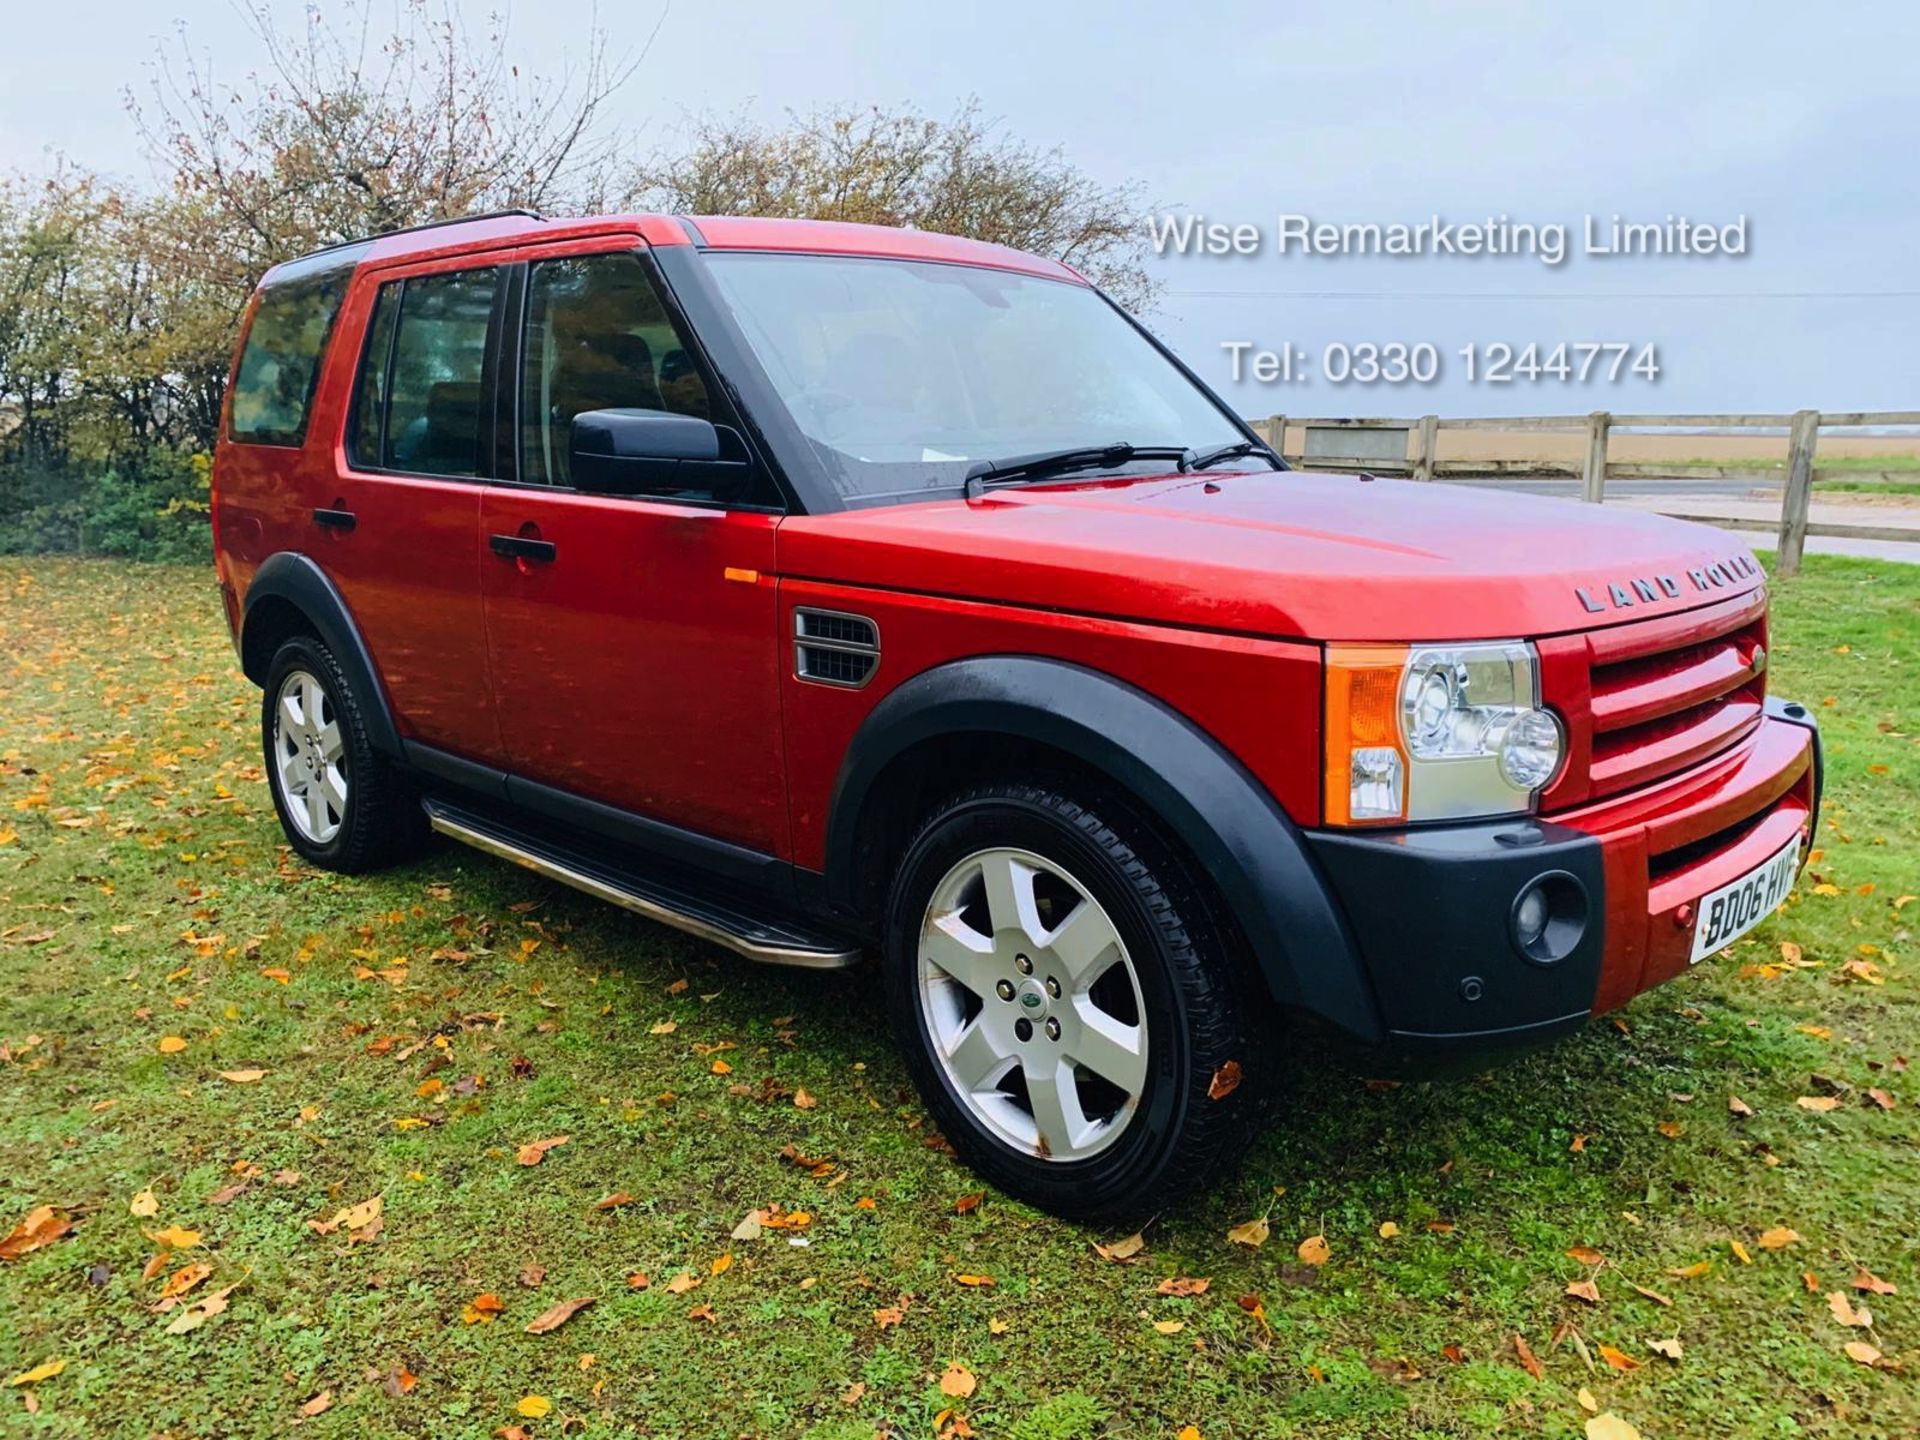 Land Rover Discovery 2.7 TDV6 HSE Auto - 2006 06 Reg - Service History - TOP SPEC - Full Leather